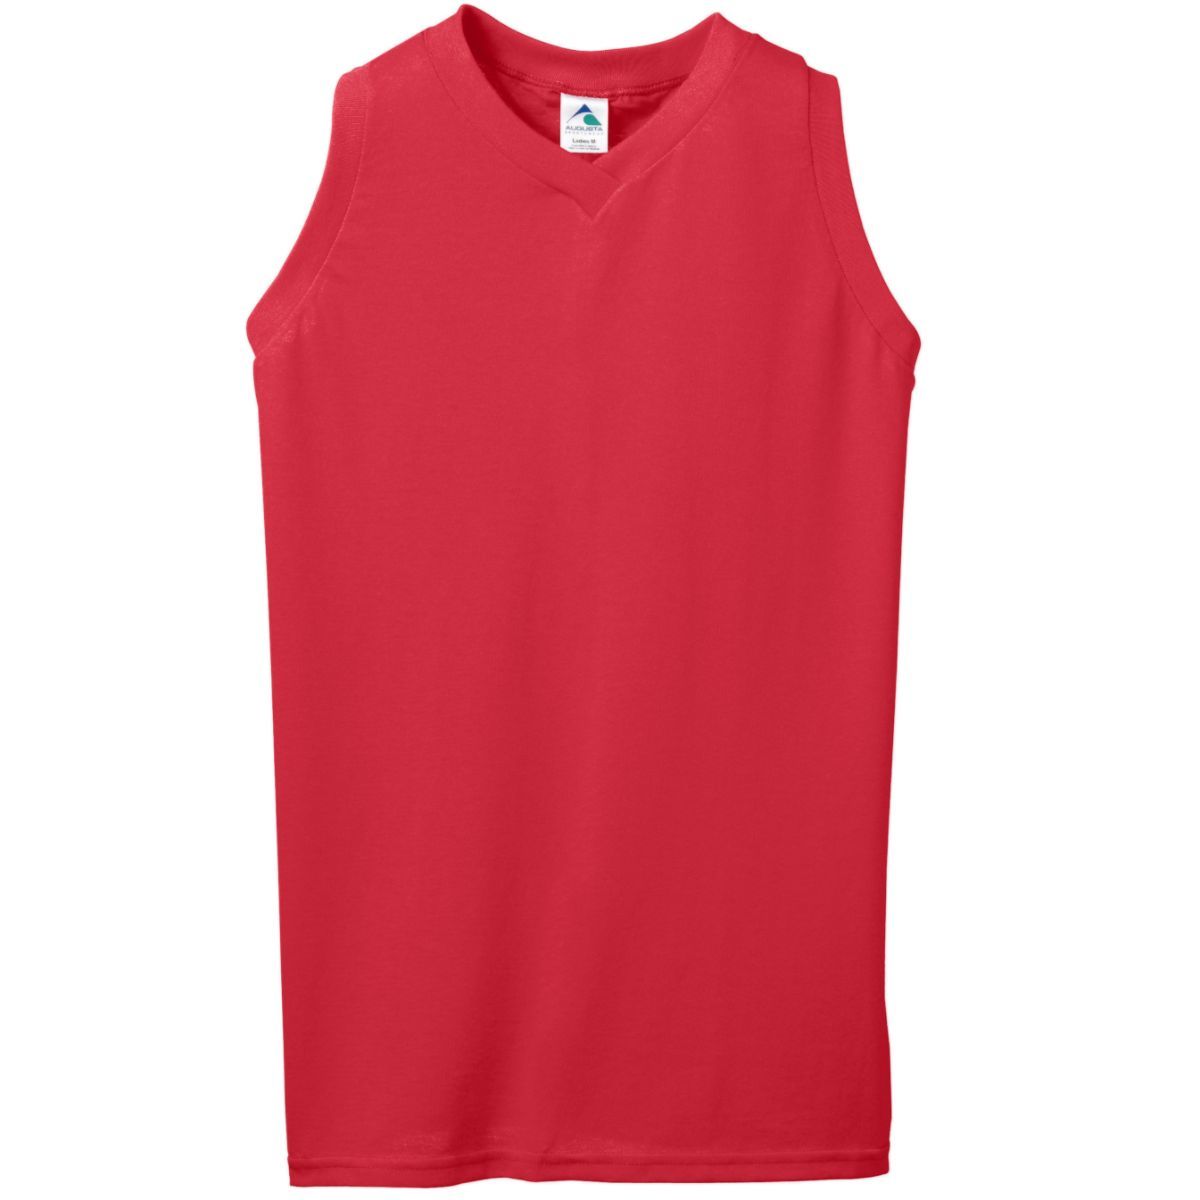 Augusta Sportswear Ladies Sleeveless V-Neck Poly/Cotton Jersey in Red  -Part of the Ladies, Ladies-Jersey, Augusta-Products, Tennis, Shirts product lines at KanaleyCreations.com